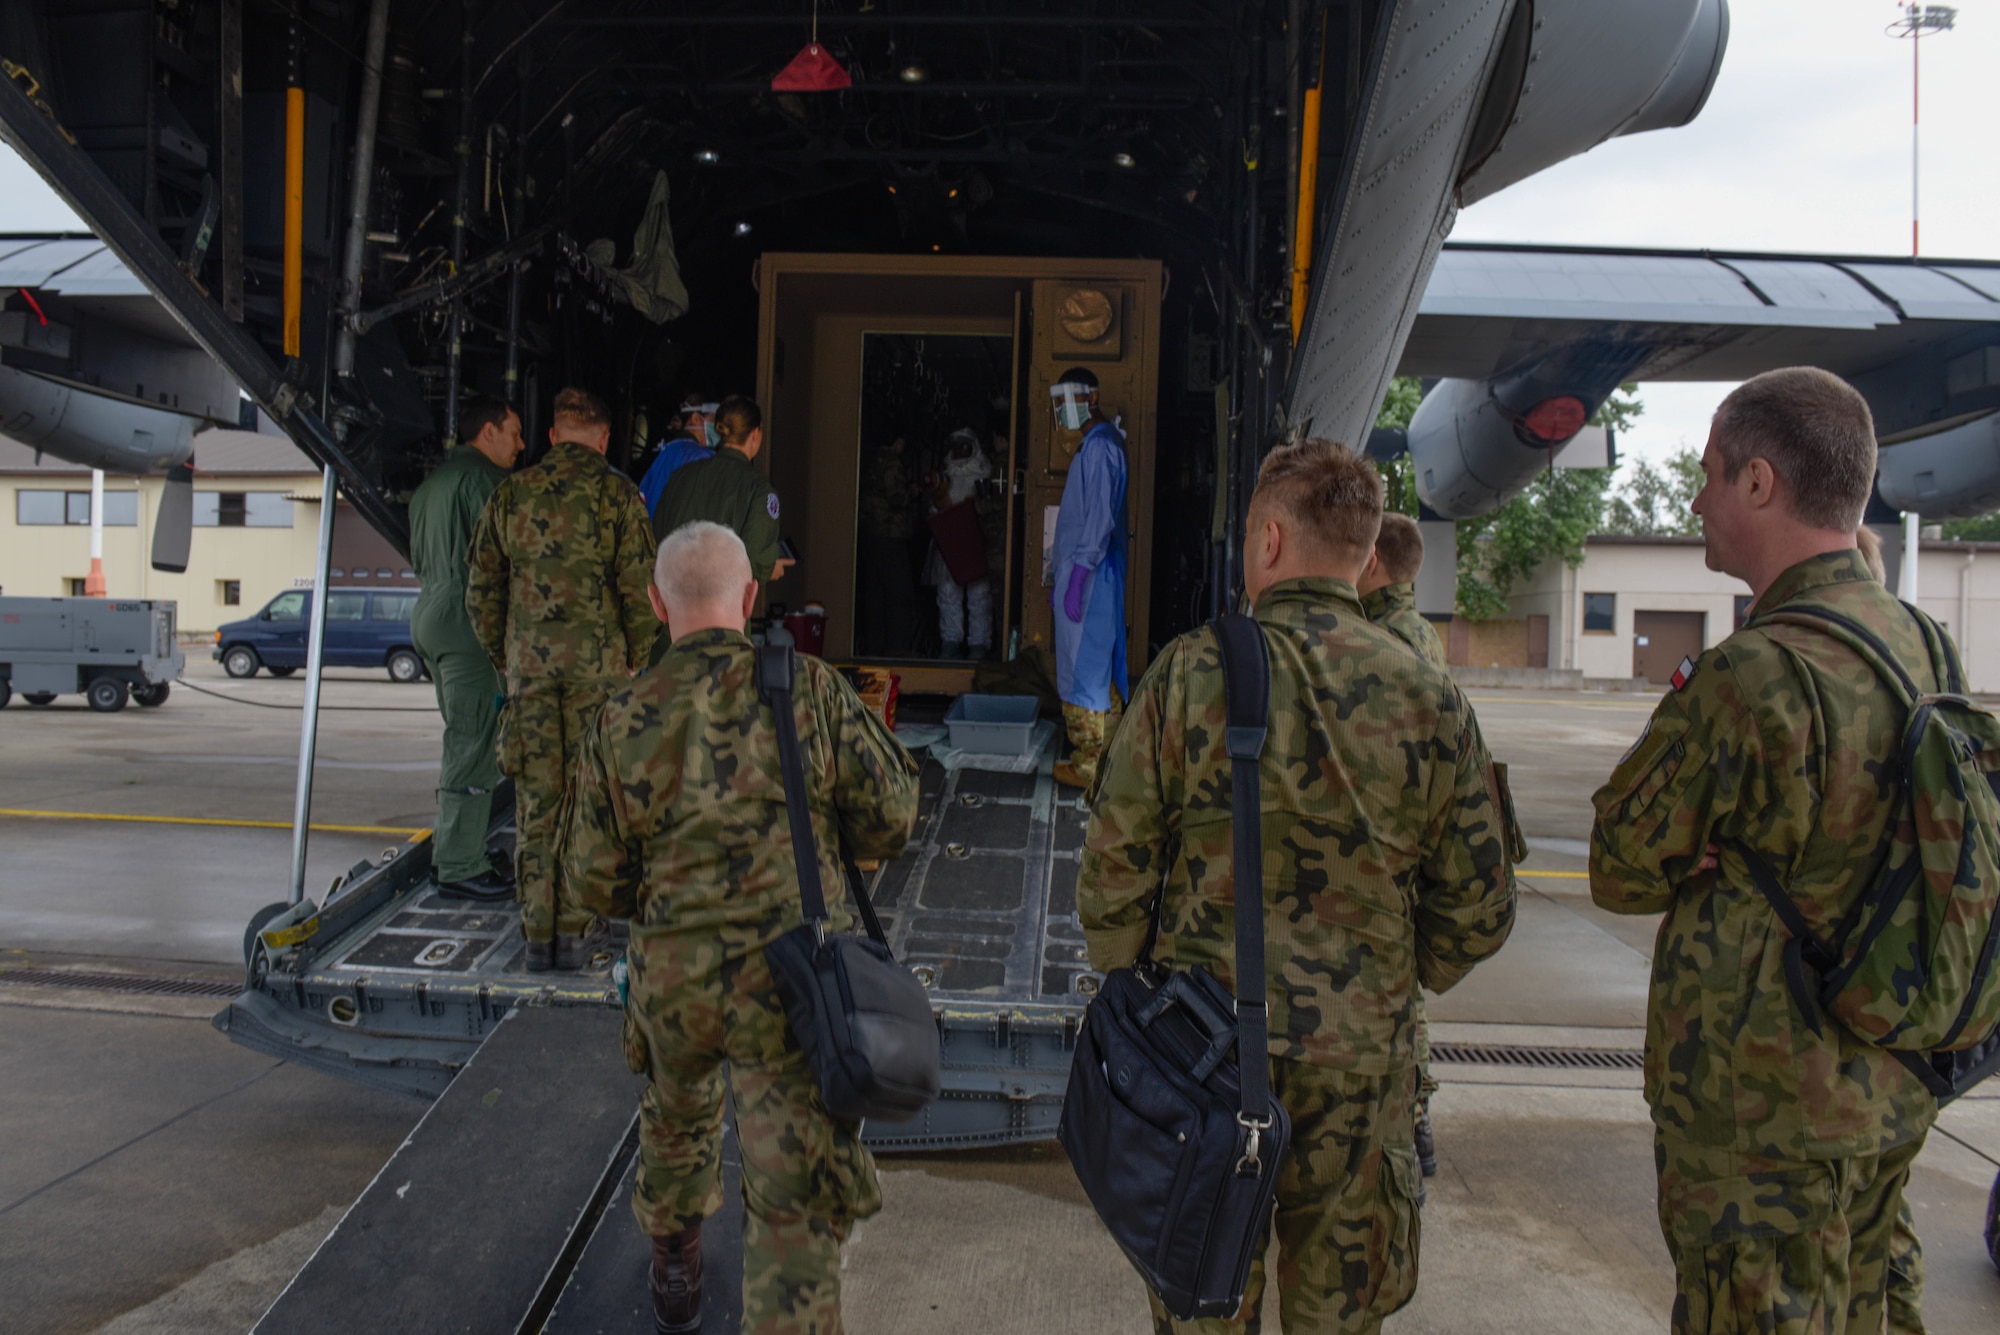 Members of the Polish army and air force observe U.S. Air Force Airmen conducting Negatively Pressurized Conex Lite training